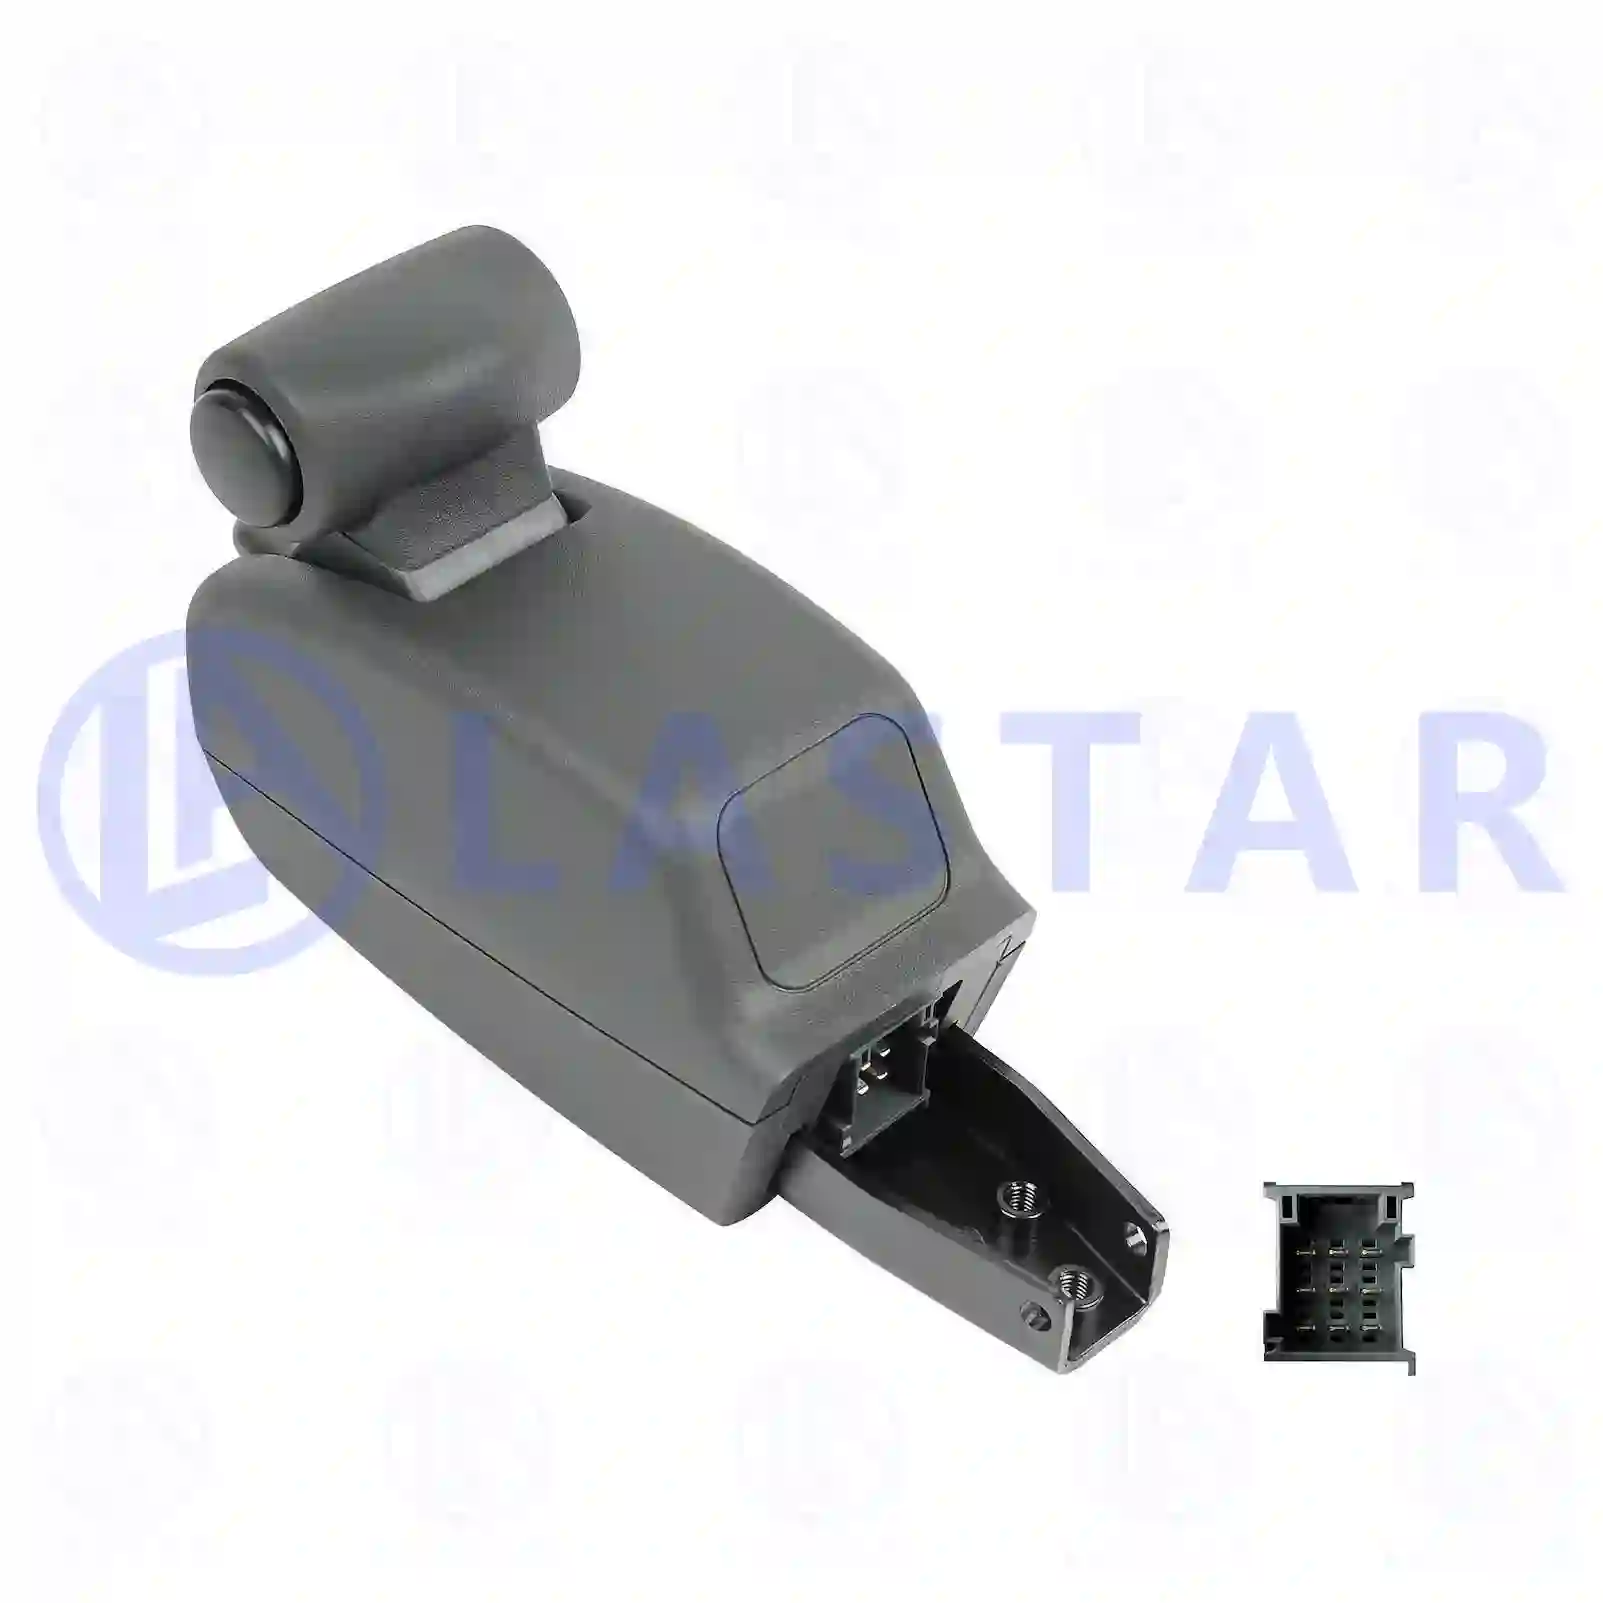 Switching device, 77732805, 9432600209, 9432600809, 9432601209 ||  77732805 Lastar Spare Part | Truck Spare Parts, Auotomotive Spare Parts Switching device, 77732805, 9432600209, 9432600809, 9432601209 ||  77732805 Lastar Spare Part | Truck Spare Parts, Auotomotive Spare Parts